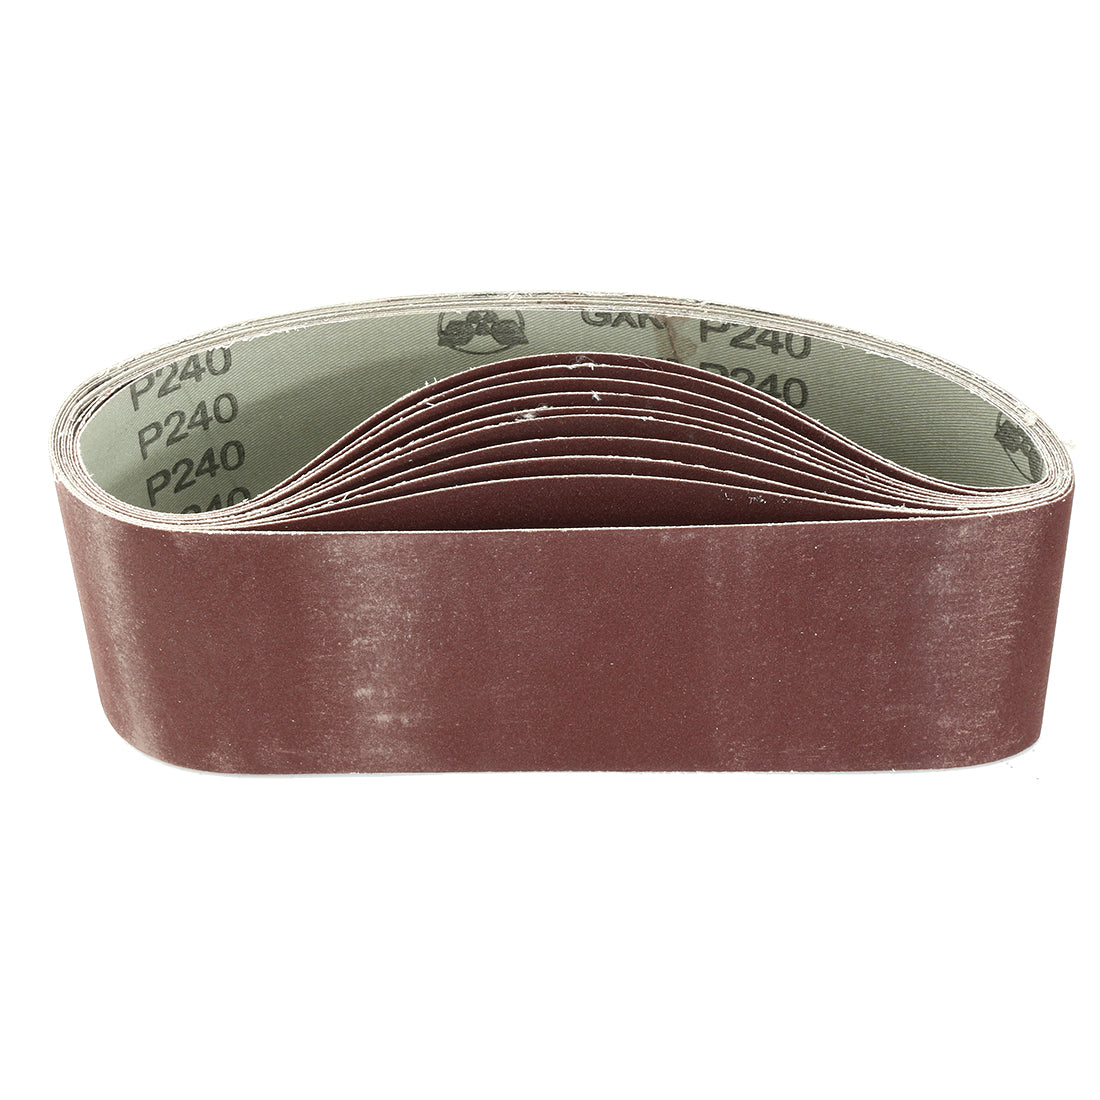 uxcell Uxcell 3-Inch x 21-Inch Aluminum Oxide Sanding Belt 240 Grits Lapped Joint 10pcs